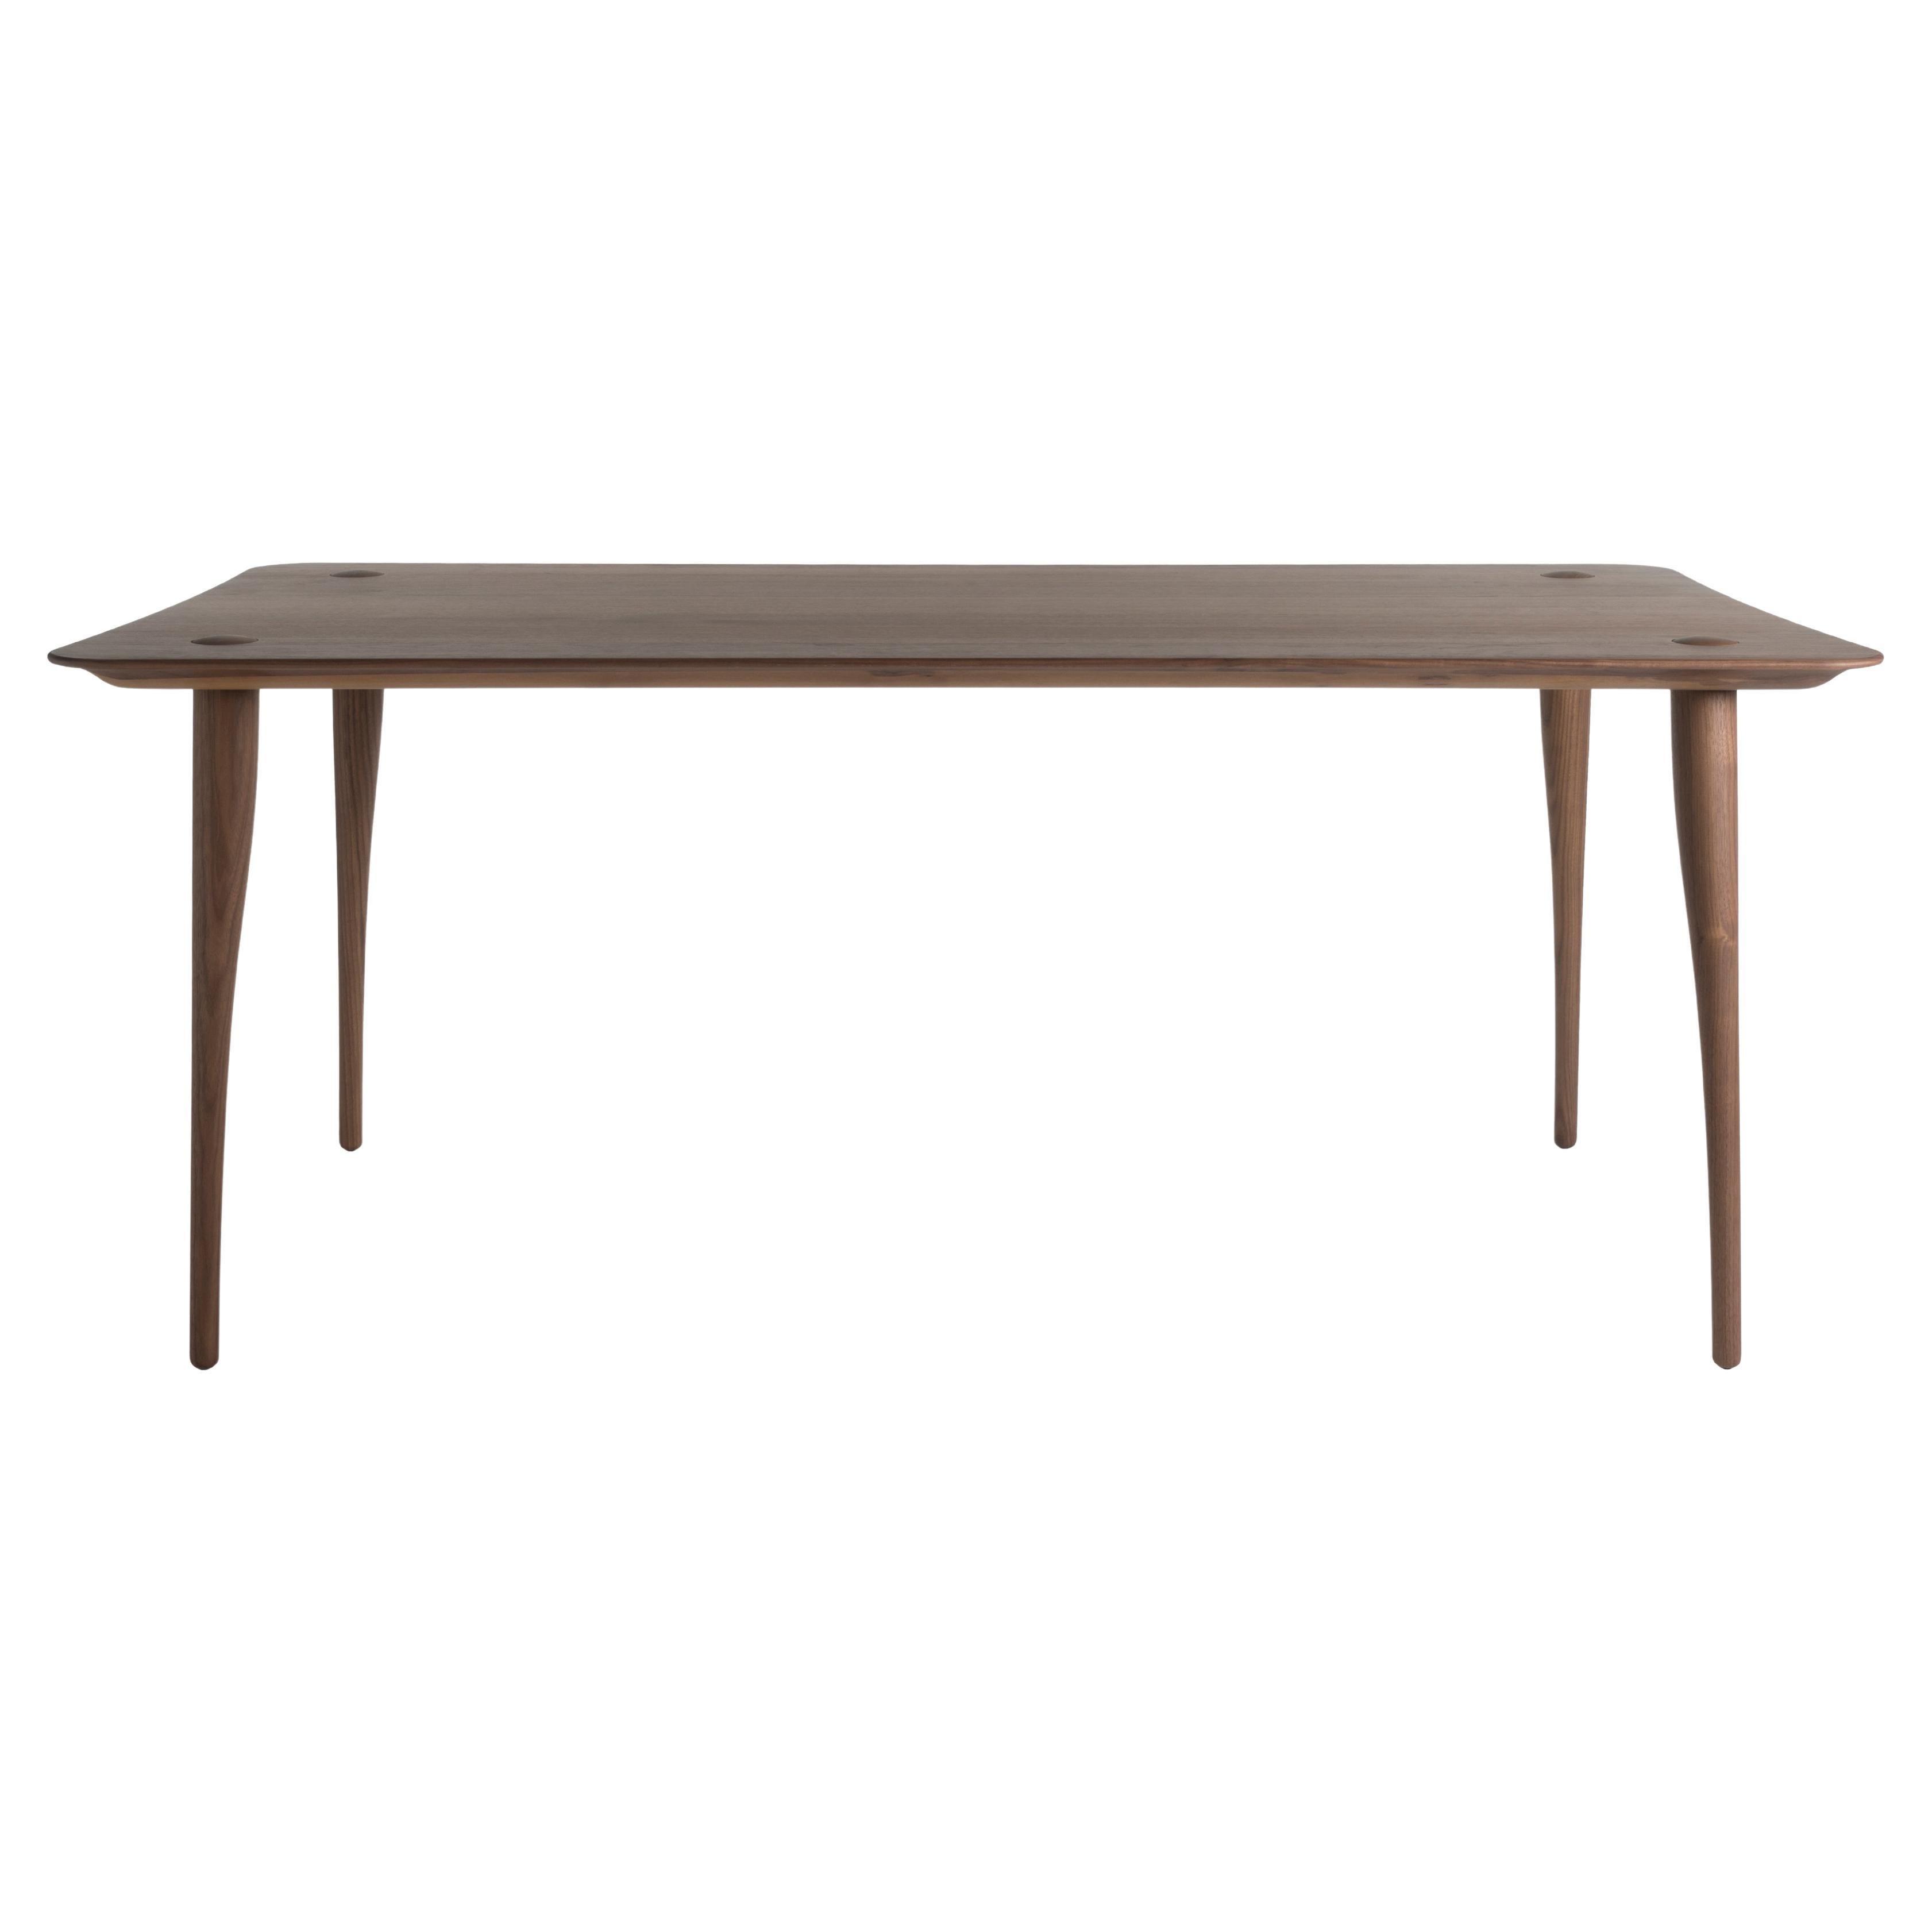 Revised Lewes - solid walnut dining table - rectangle 240x95cm For Sale